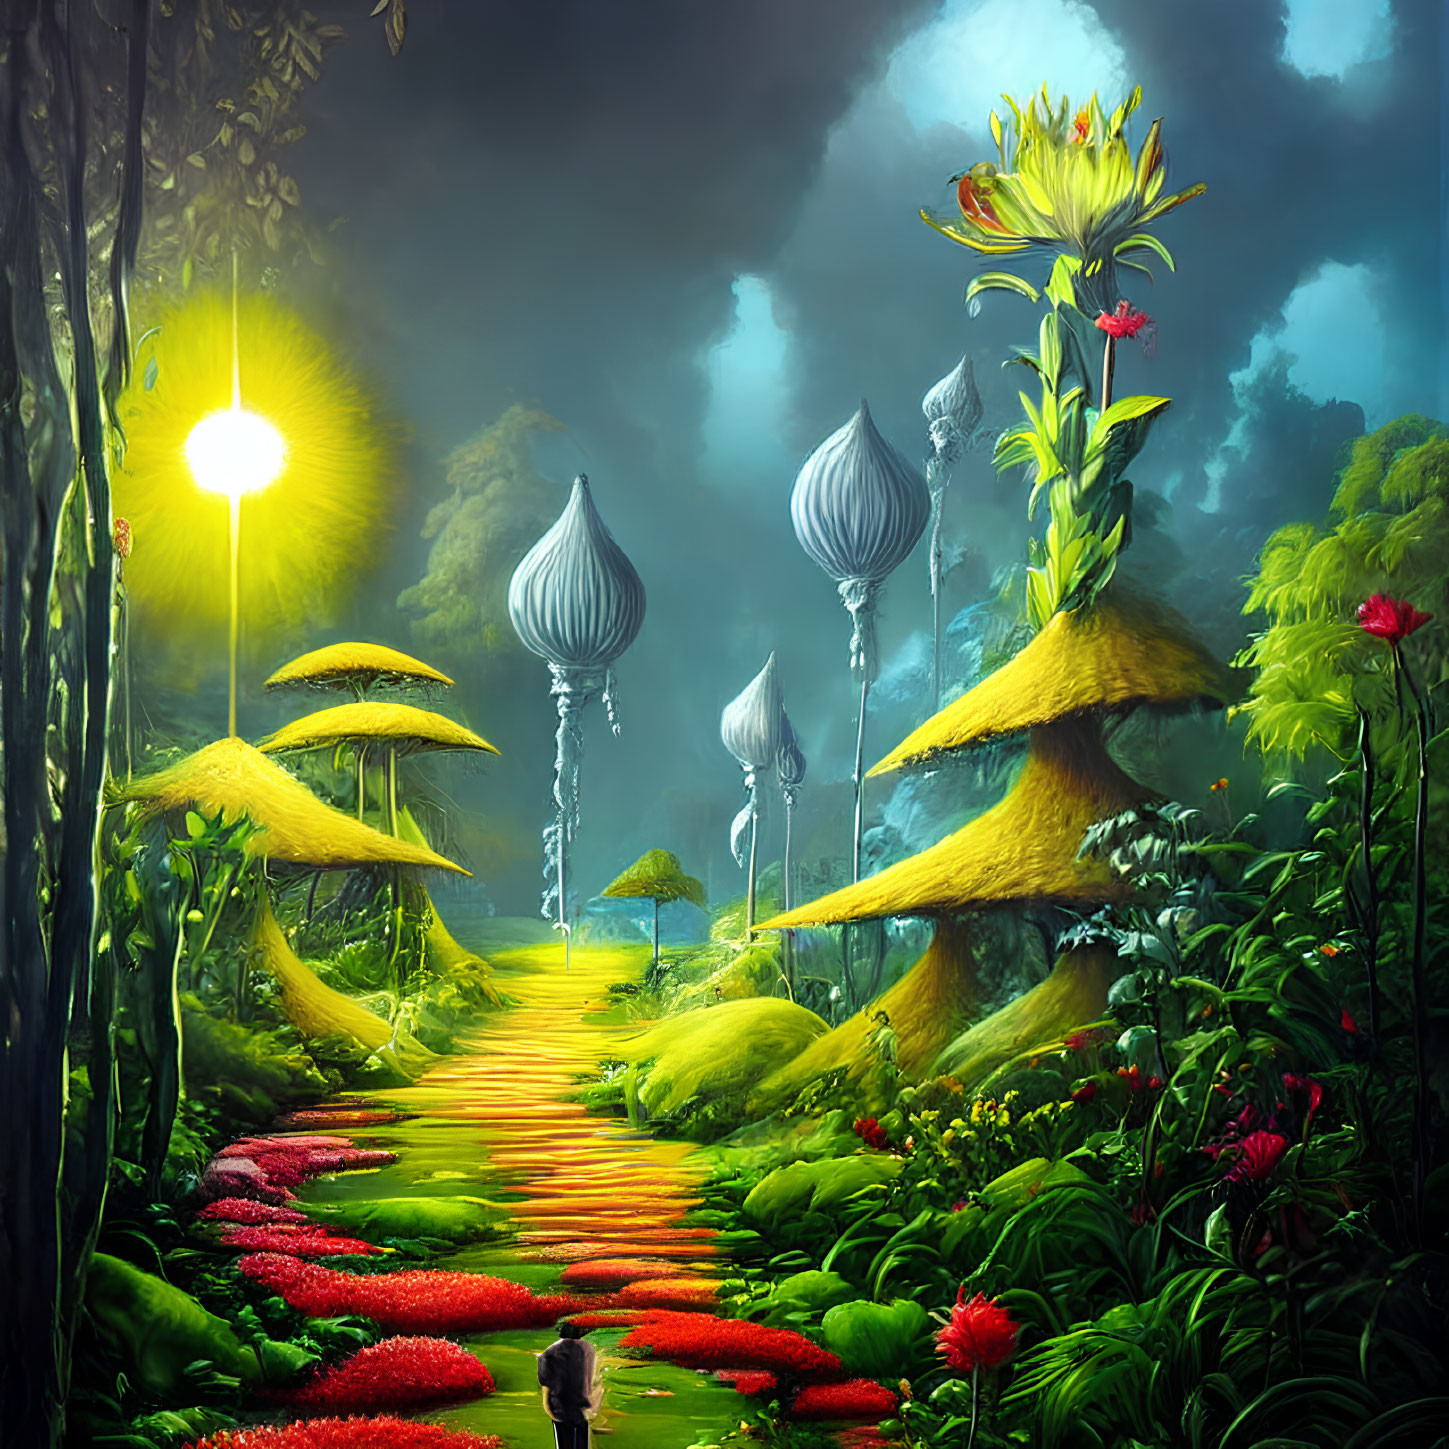 Fantastical Moonlit Path with Oversized Mushrooms and Luminescent Plants